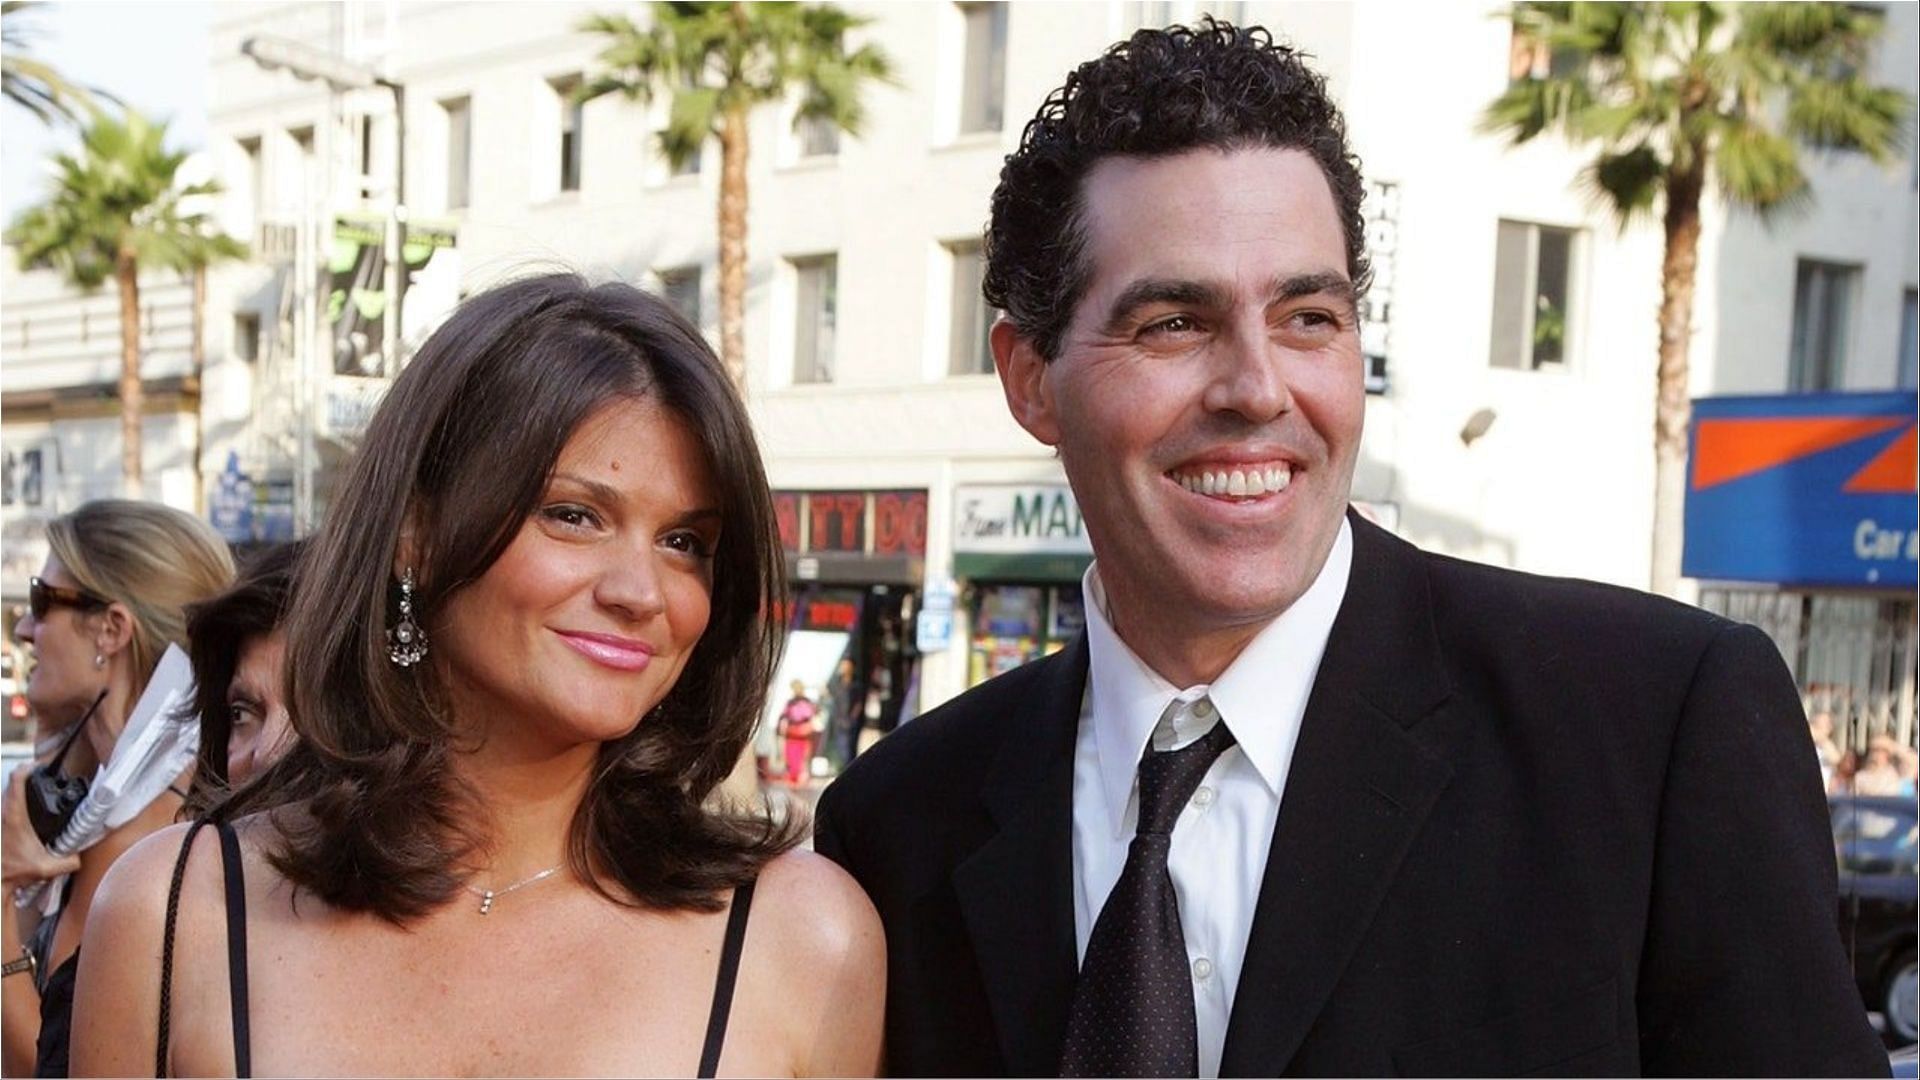 Adam Carolla will be paying child support and spousal support to Lynette Paradise (Image via SoFloDivorceLaw/Twitter)